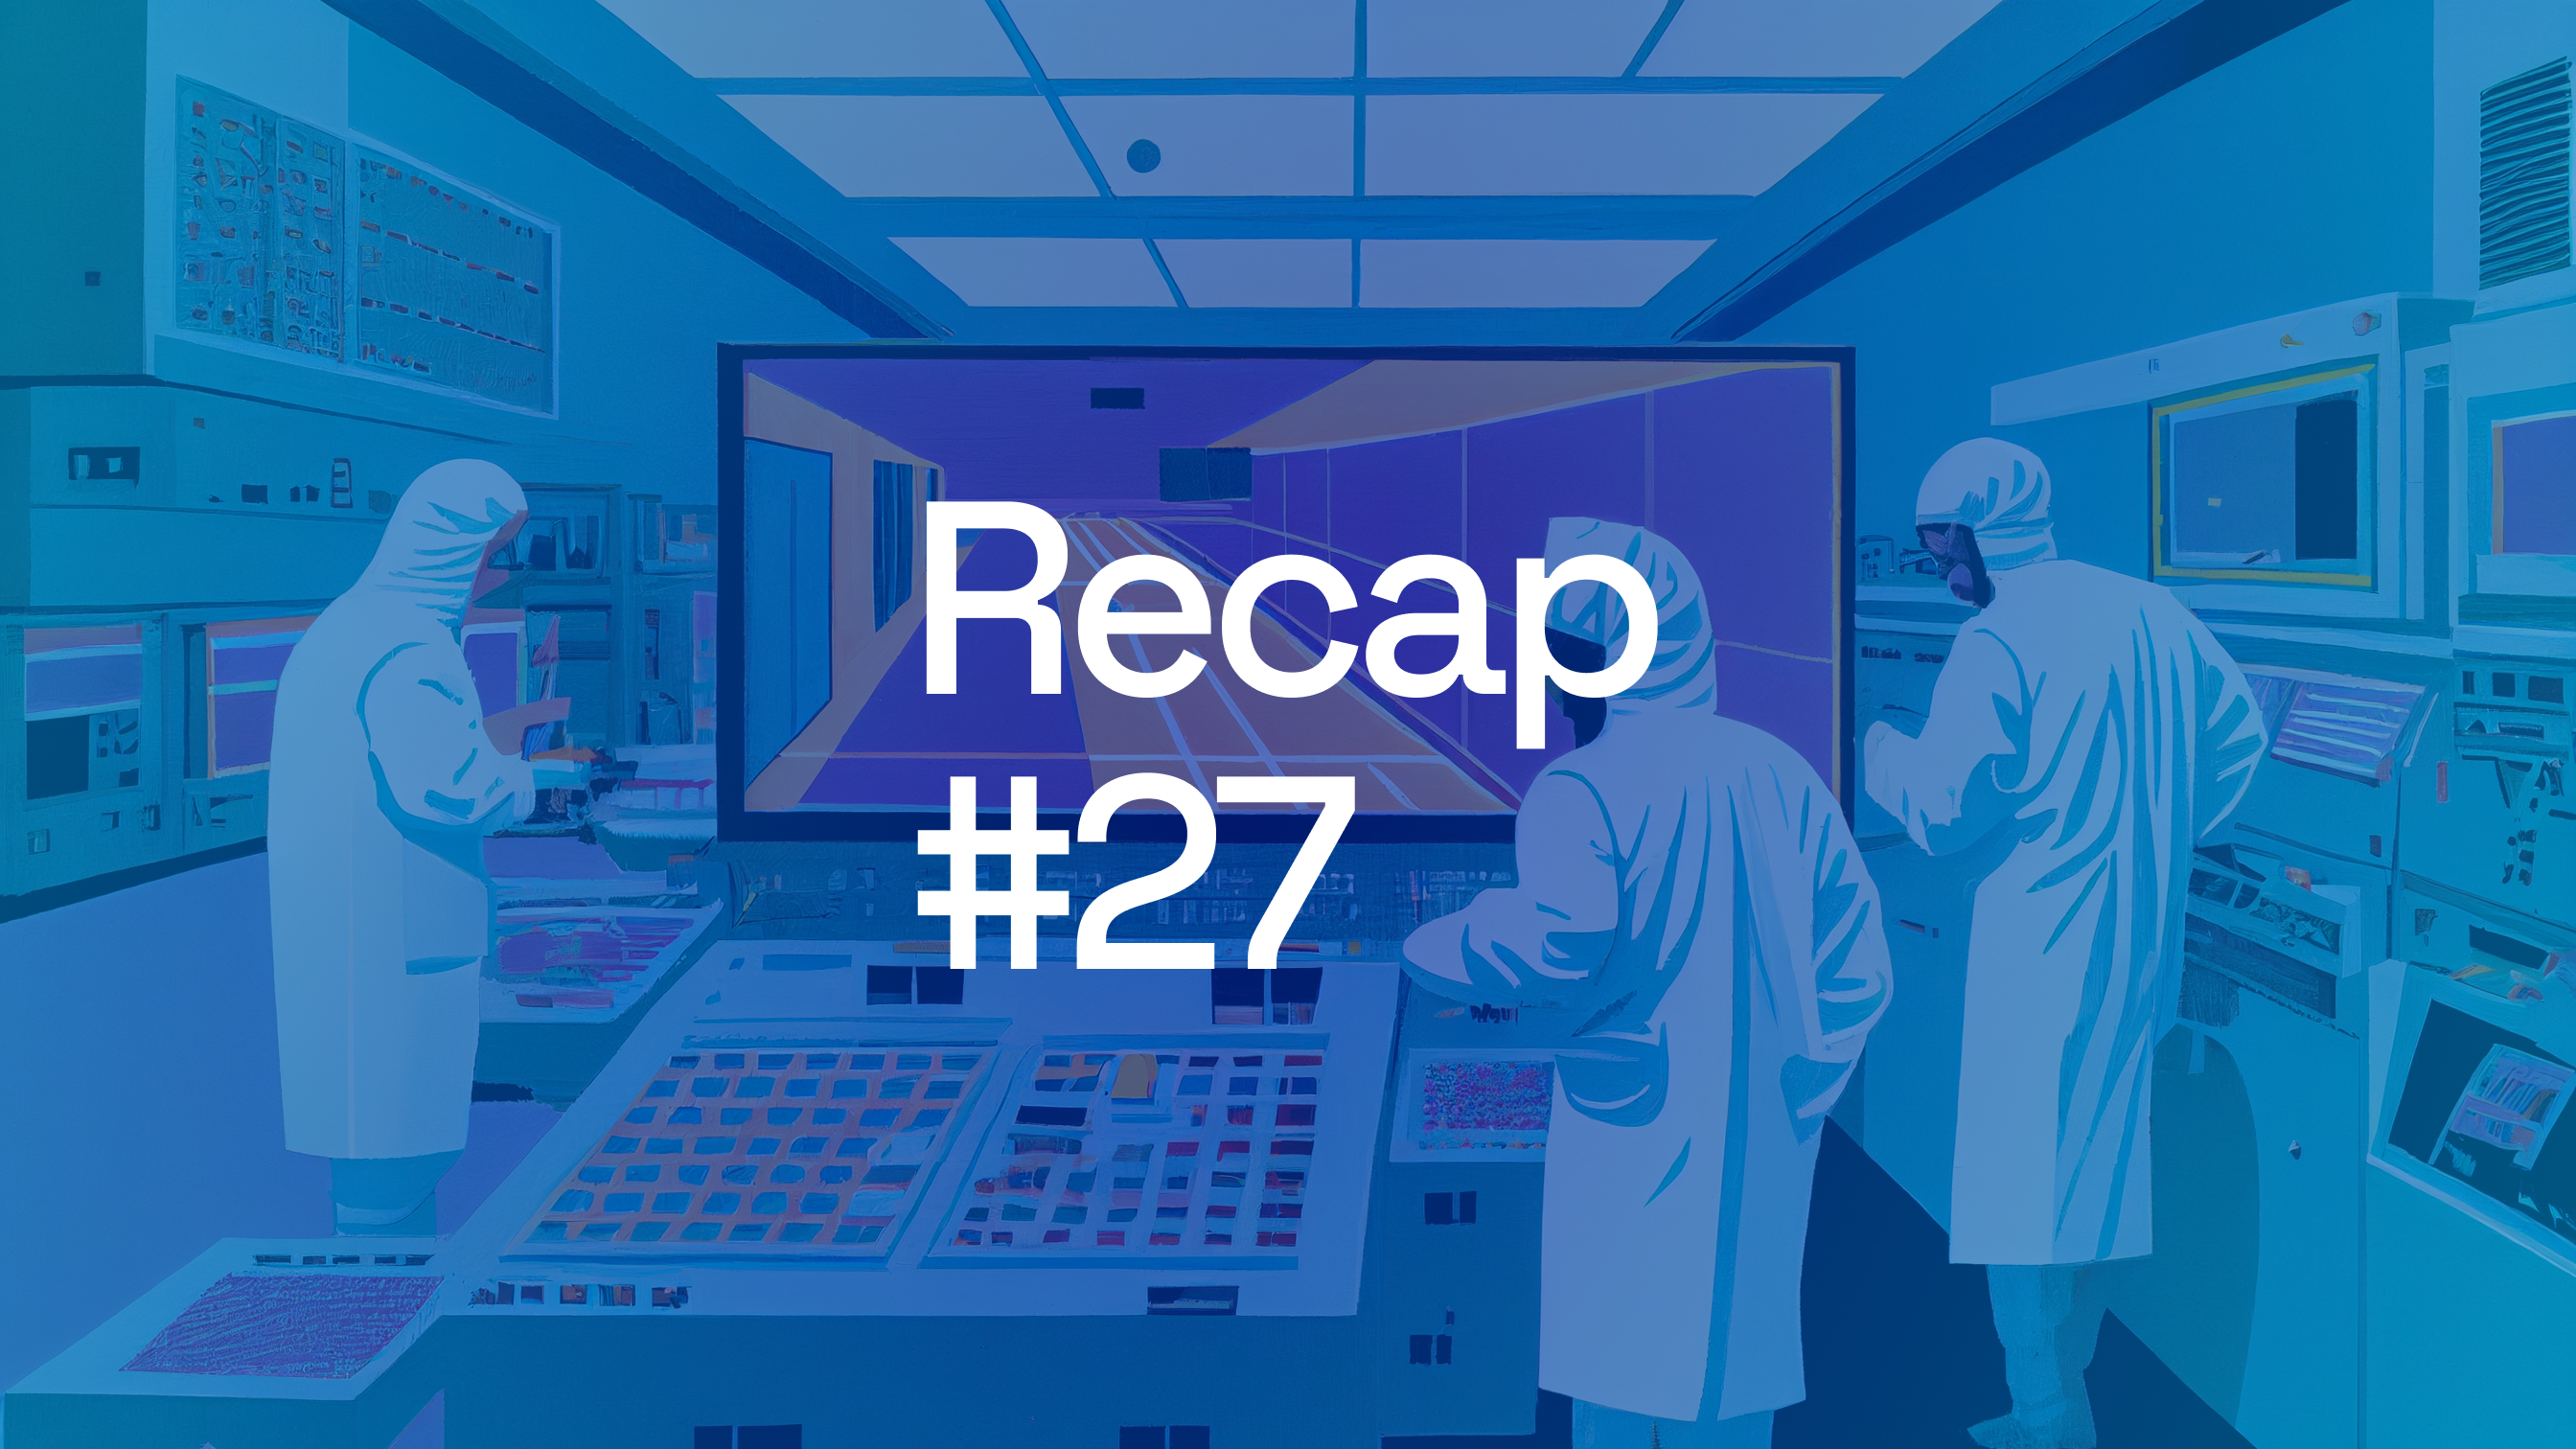 Recap #27 features NVIDIA, HEICO, and Sam Zell's 8 lessons